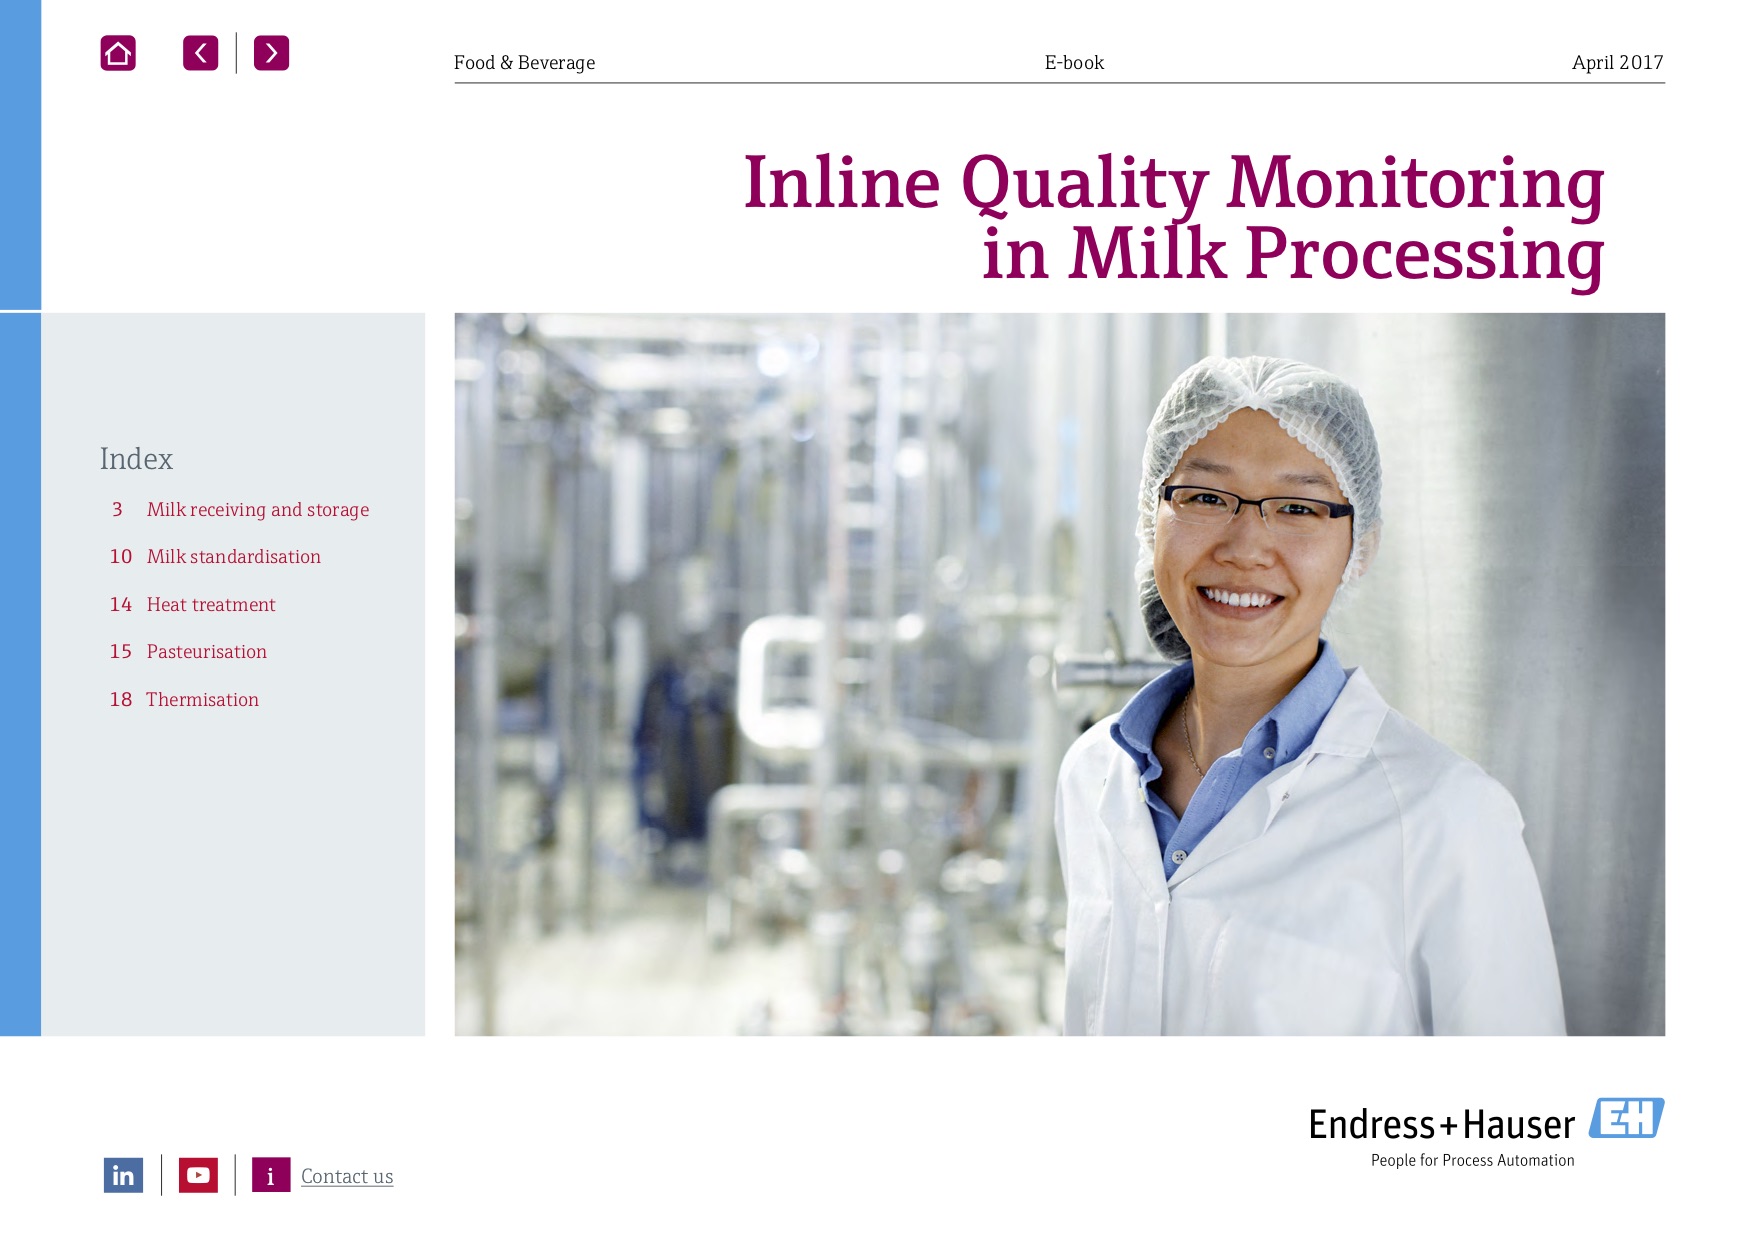 This paper describes the processes and instrumentation required for inline quality monitoring whole milk processing.